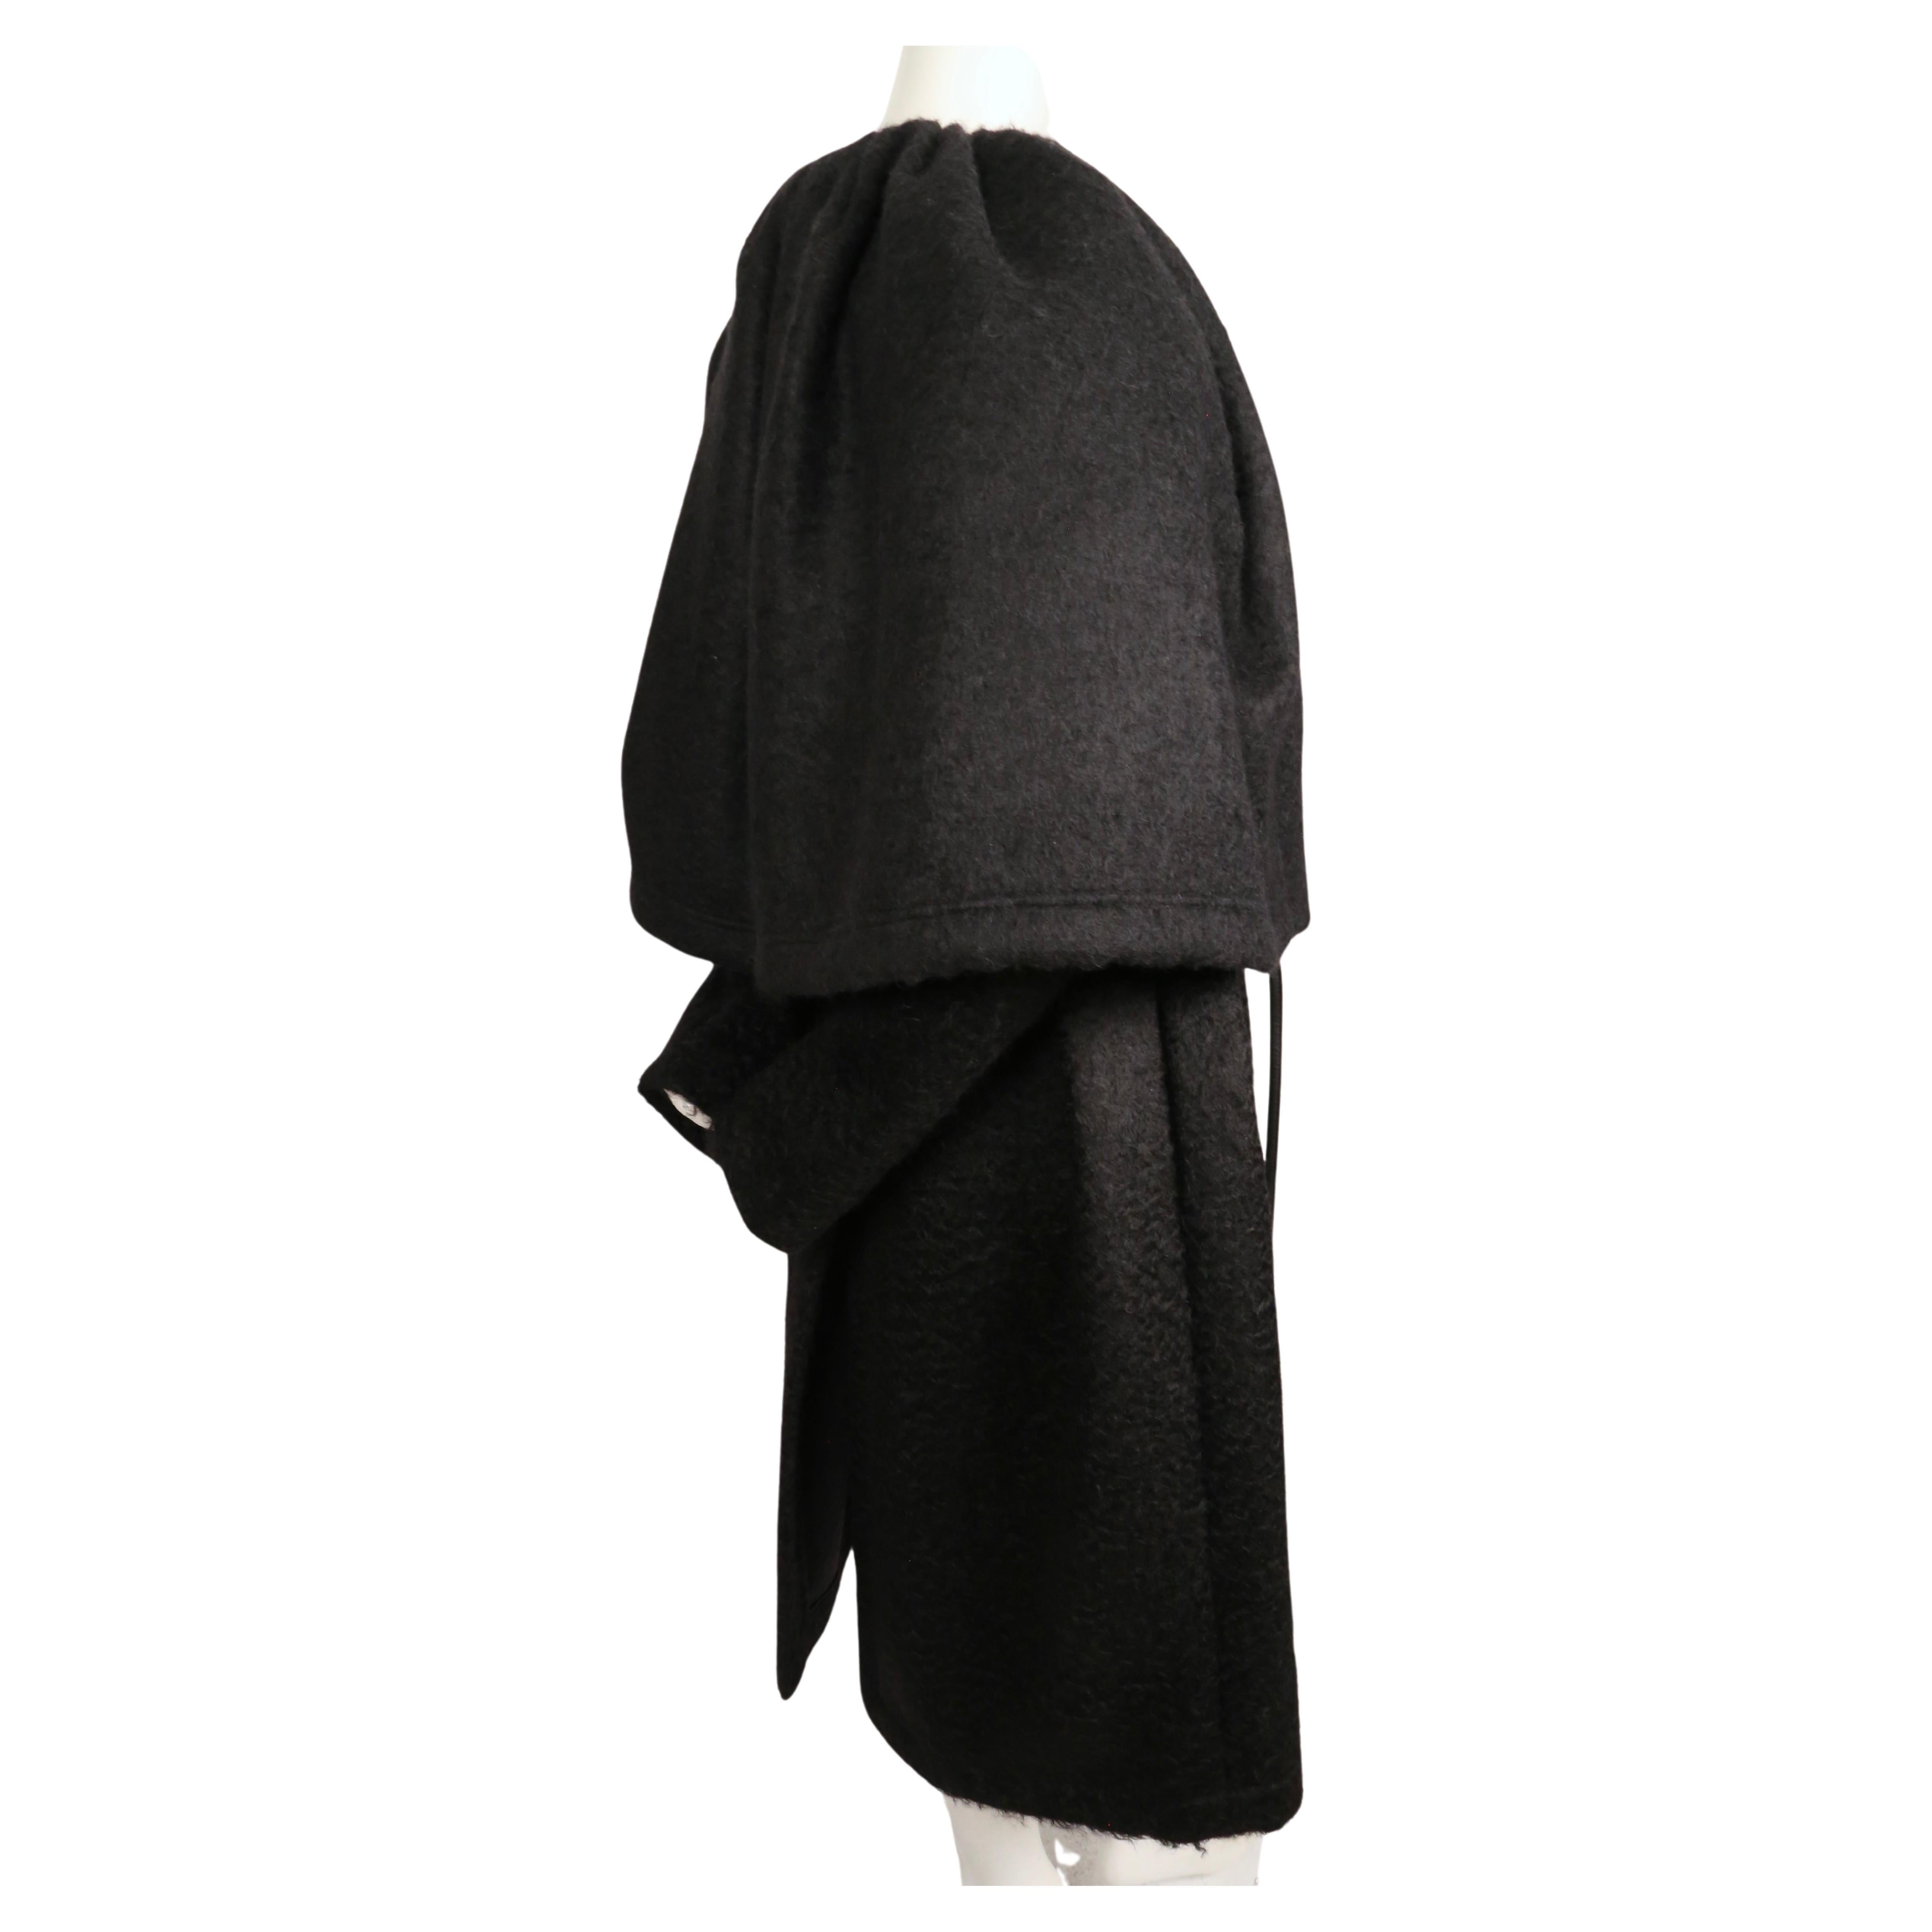 Women's or Men's new 2016 CELINE by PHOEBE PHILO black mohair wool RUNWAY coat with attached cape For Sale